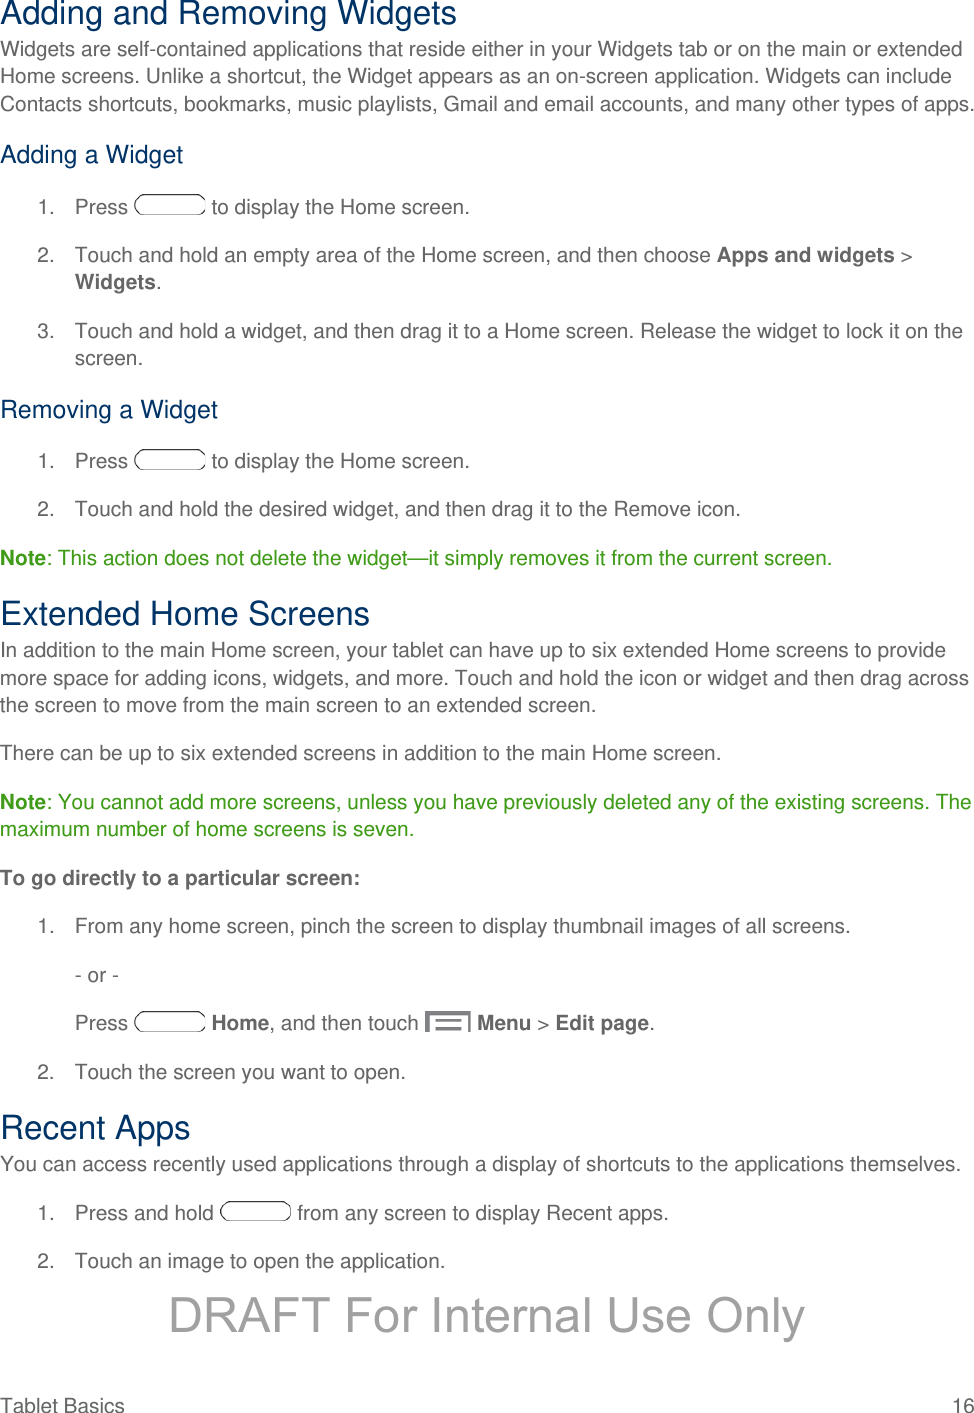 Adding and Removing Widgets Widgets are self-contained applications that reside either in your Widgets tab or on the main or extended Home screens. Unlike a shortcut, the Widget appears as an on-screen application. Widgets can include Contacts shortcuts, bookmarks, music playlists, Gmail and email accounts, and many other types of apps. Adding a Widget 1. Press   to display the Home screen. 2. Touch and hold an empty area of the Home screen, and then choose Apps and widgets &gt; Widgets. 3. Touch and hold a widget, and then drag it to a Home screen. Release the widget to lock it on the screen. Removing a Widget 1. Press   to display the Home screen. 2. Touch and hold the desired widget, and then drag it to the Remove icon. Note: This action does not delete the widget—it simply removes it from the current screen. Extended Home Screens In addition to the main Home screen, your tablet can have up to six extended Home screens to provide more space for adding icons, widgets, and more. Touch and hold the icon or widget and then drag across the screen to move from the main screen to an extended screen. There can be up to six extended screens in addition to the main Home screen. Note: You cannot add more screens, unless you have previously deleted any of the existing screens. The maximum number of home screens is seven. To go directly to a particular screen: 1. From any home screen, pinch the screen to display thumbnail images of all screens. - or - Press   Home, and then touch   Menu &gt; Edit page. 2. Touch the screen you want to open. Recent Apps You can access recently used applications through a display of shortcuts to the applications themselves.  1. Press and hold   from any screen to display Recent apps. 2. Touch an image to open the application. Tablet Basics 16   DRAFT For Internal Use Only